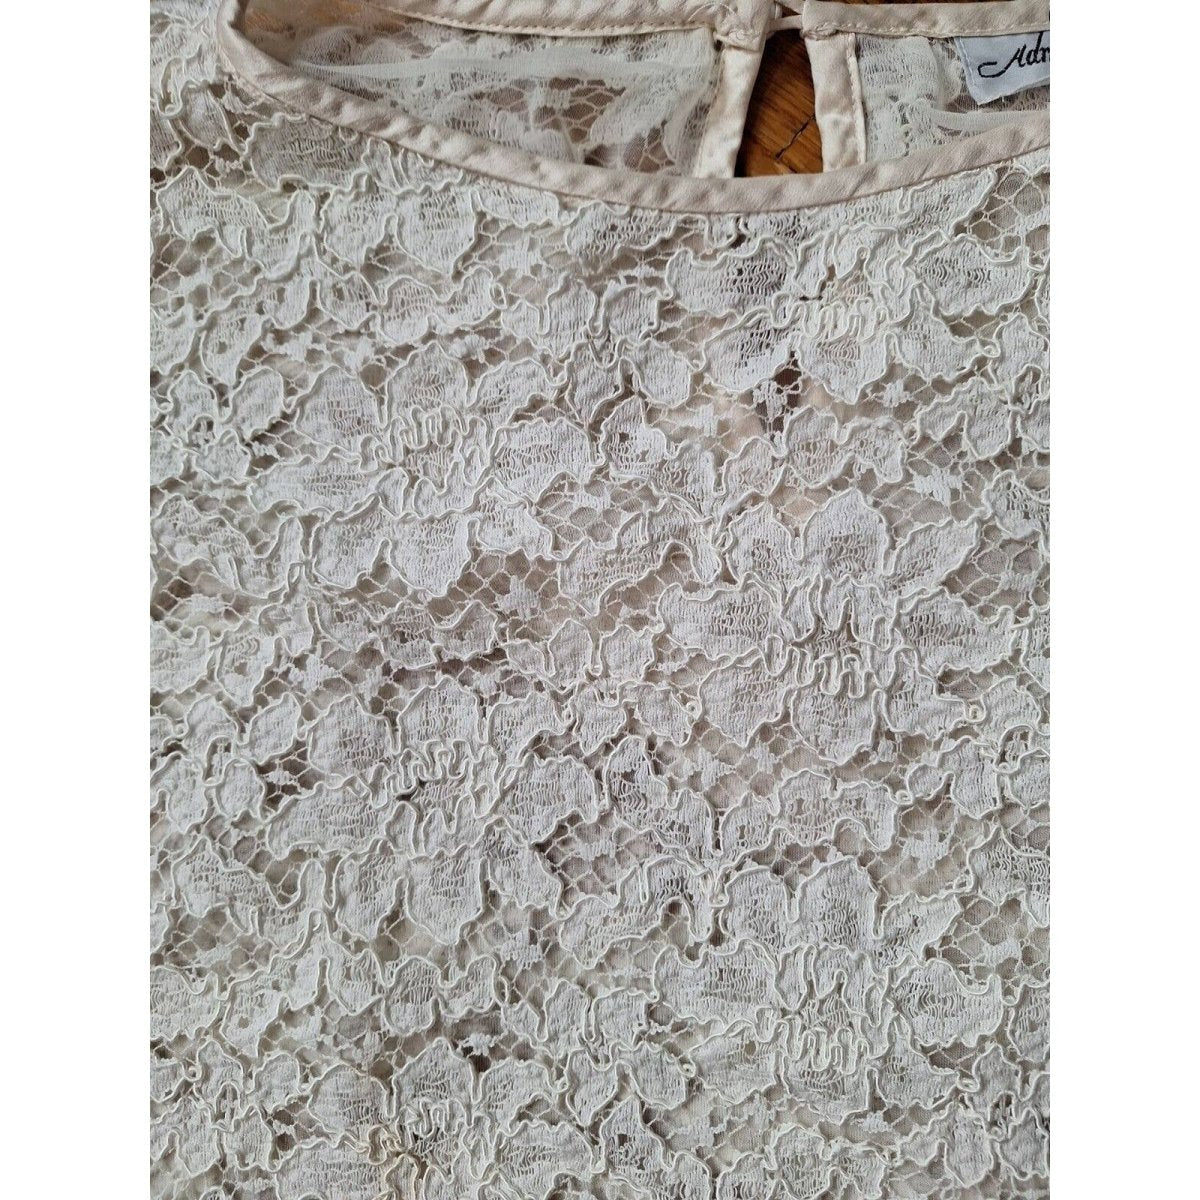 80s/90s Cream Sheer Lace Dolman Blouse Size 4 Small - themallvintage The Mall Vintage